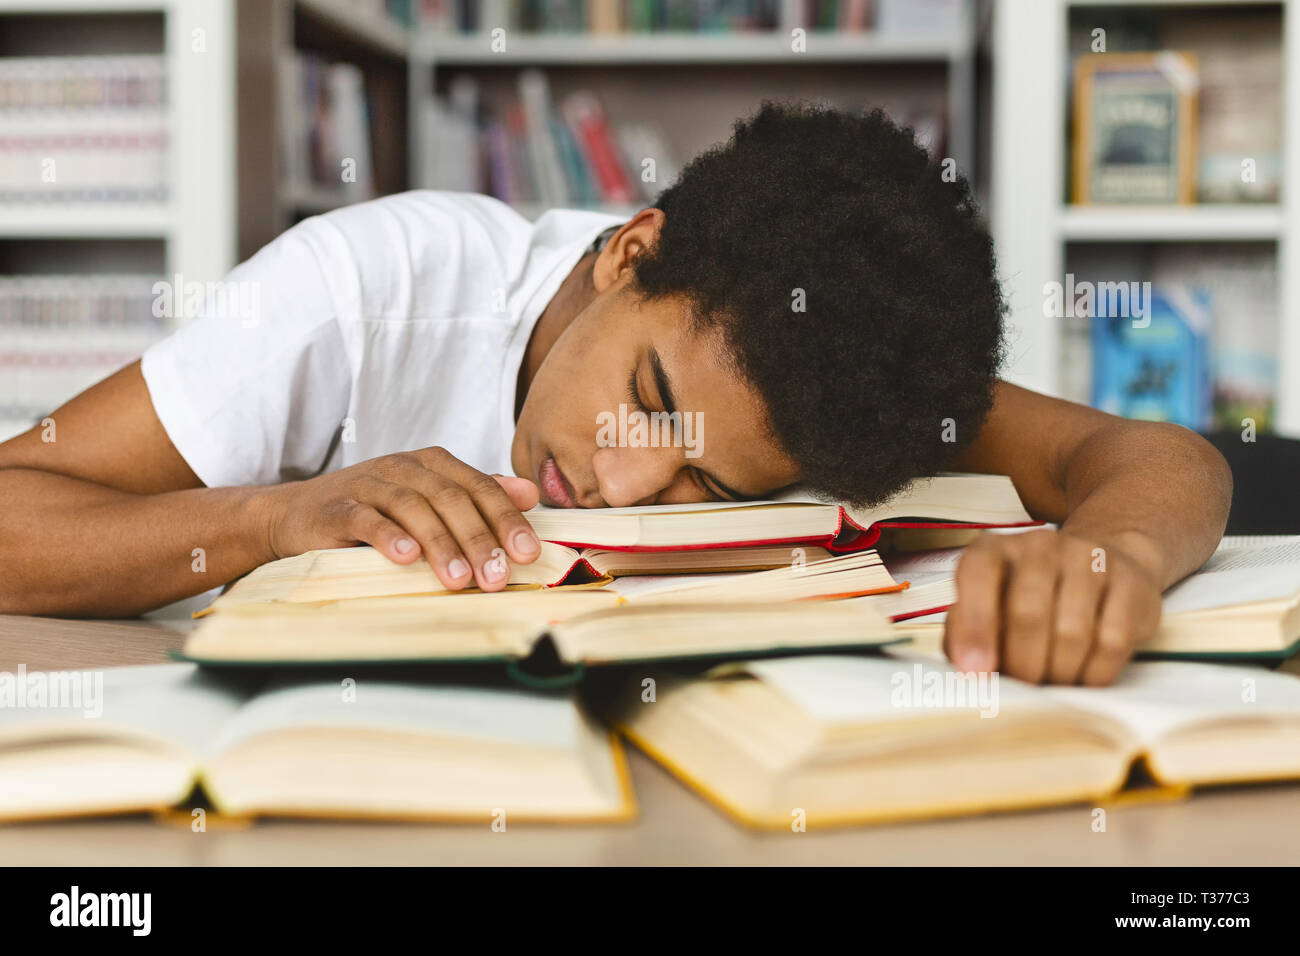 Tired guy napping on books stack in library Stock Photo